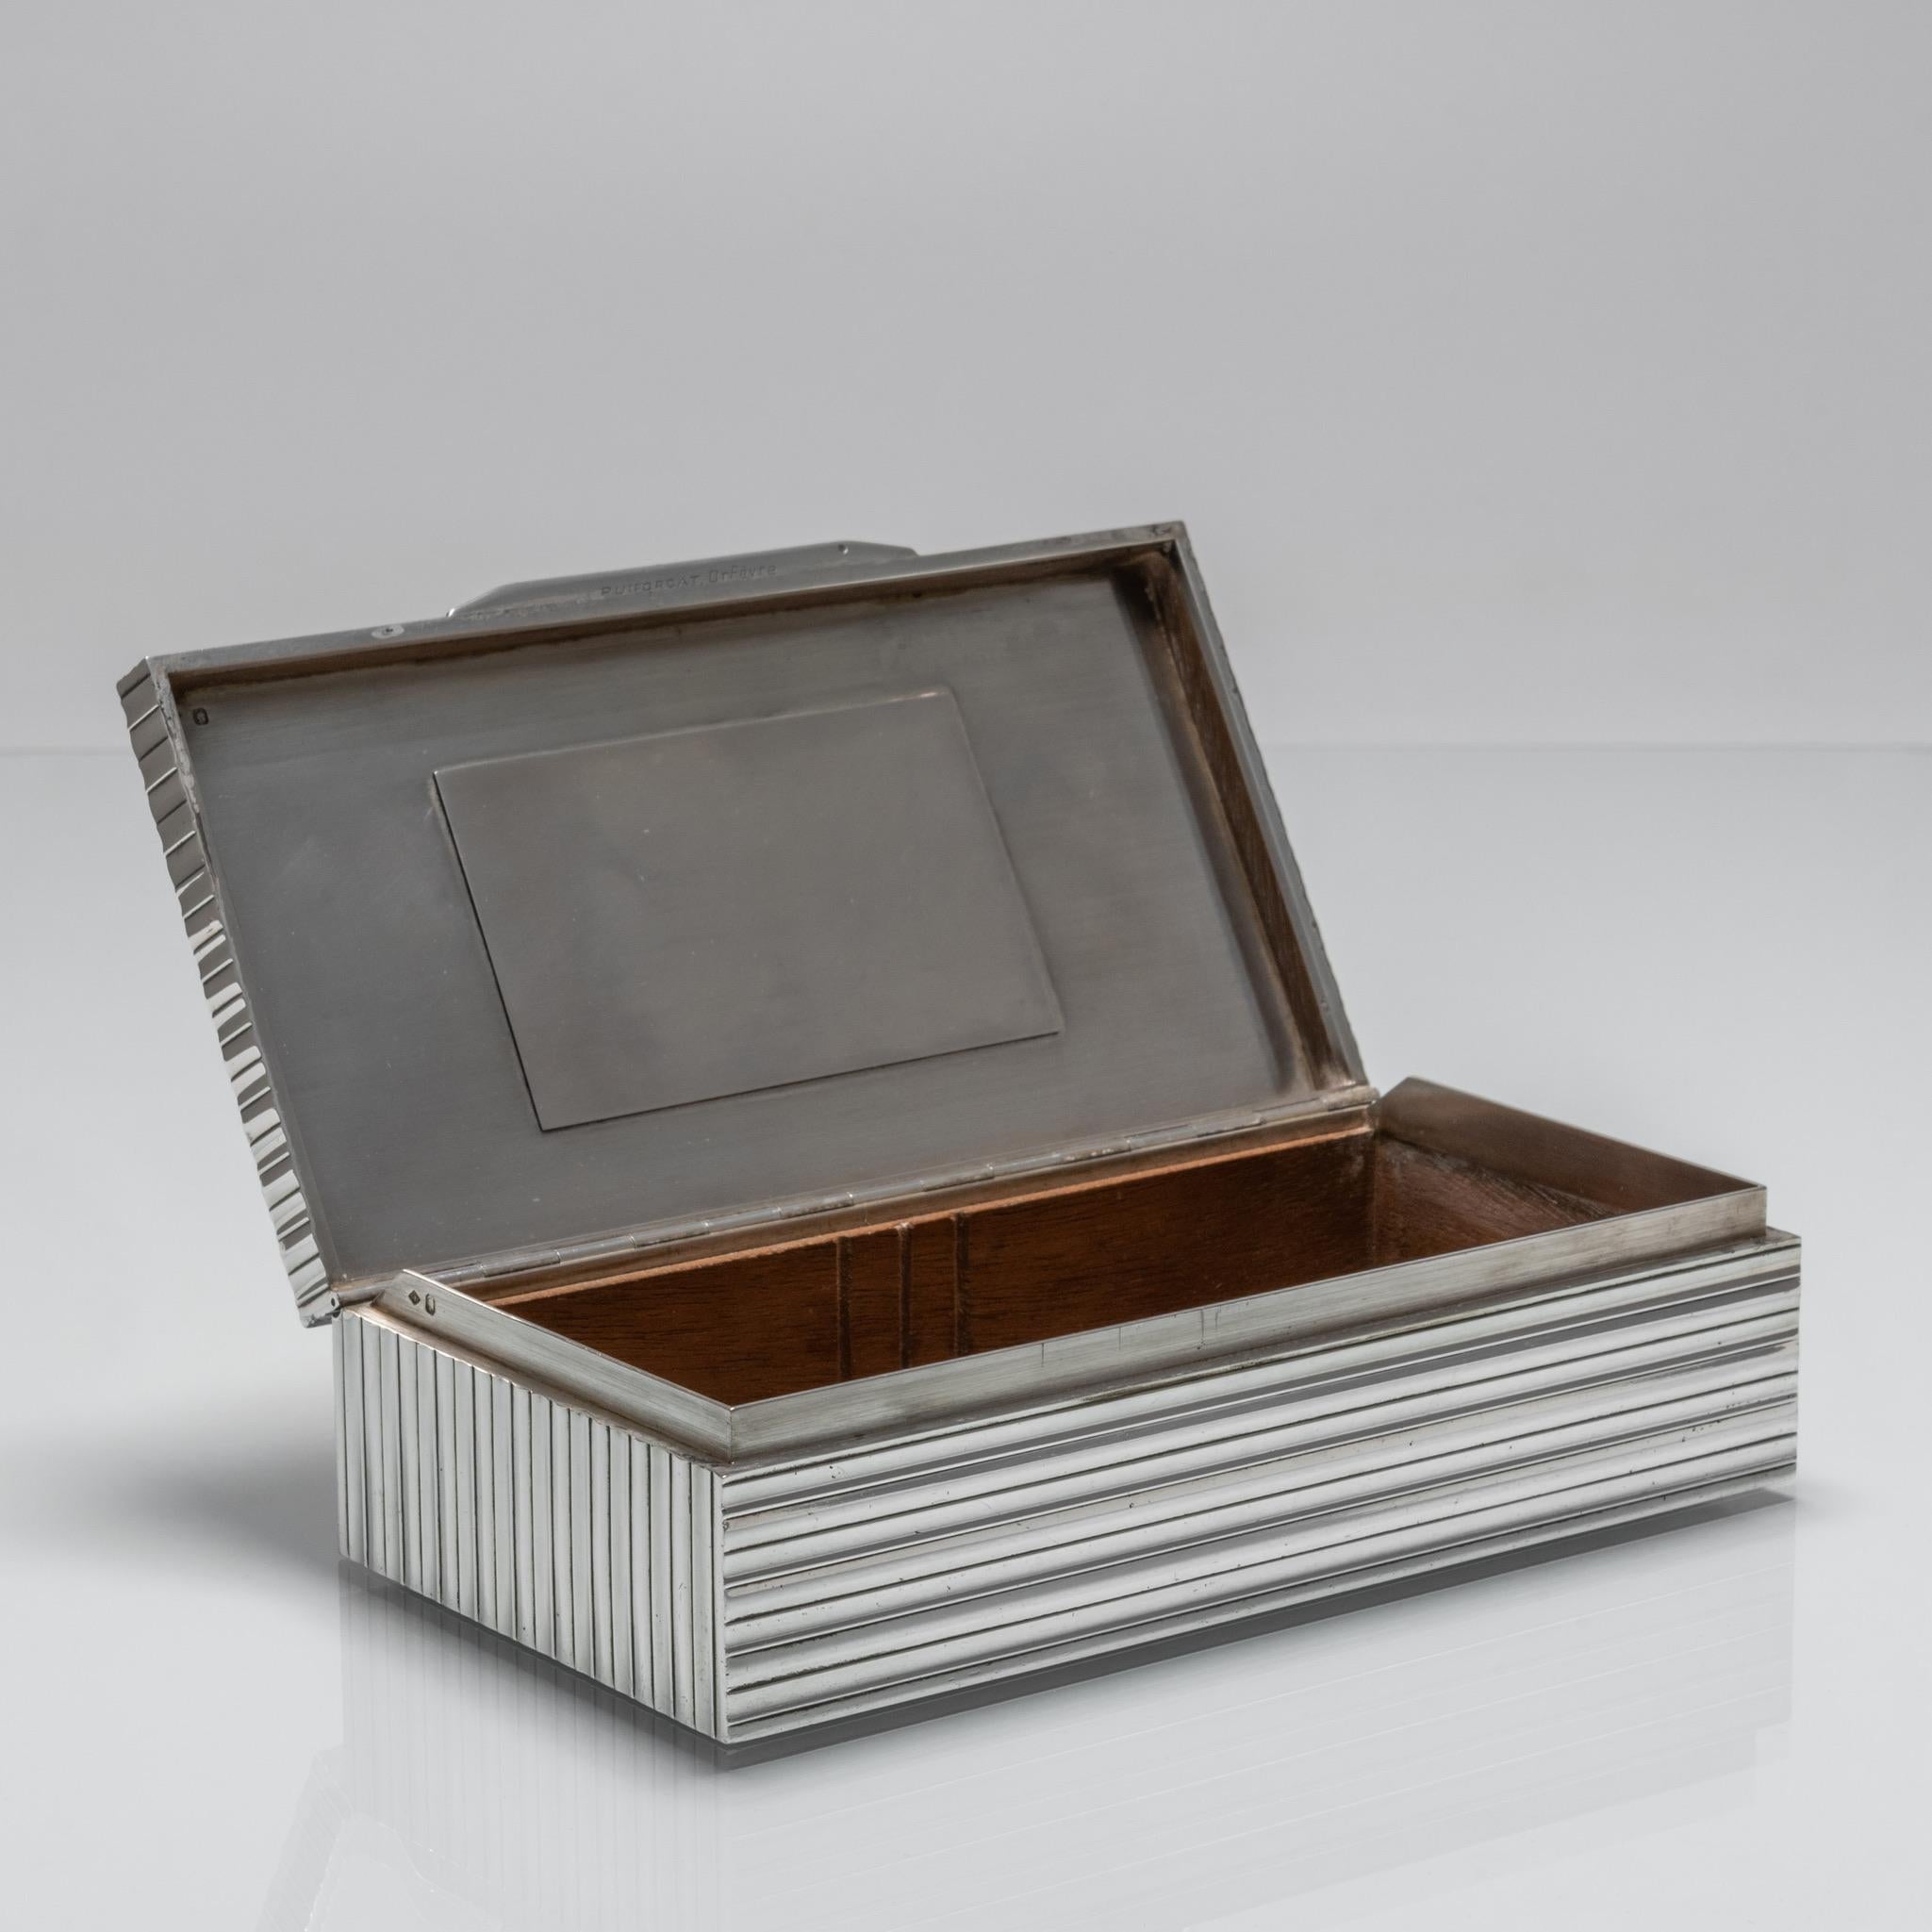 A stylish cigarette box in reeded silver with cedar lining by Jean Emile Puiforcat (1897-1945), French Art Deco silversmith, sculptor and designer.

Dimensions: 18cm/7 inches (length) x 9.5cm/3¾ inches (depth) x 4.5cm/1¼ inches (height).

Bentleys